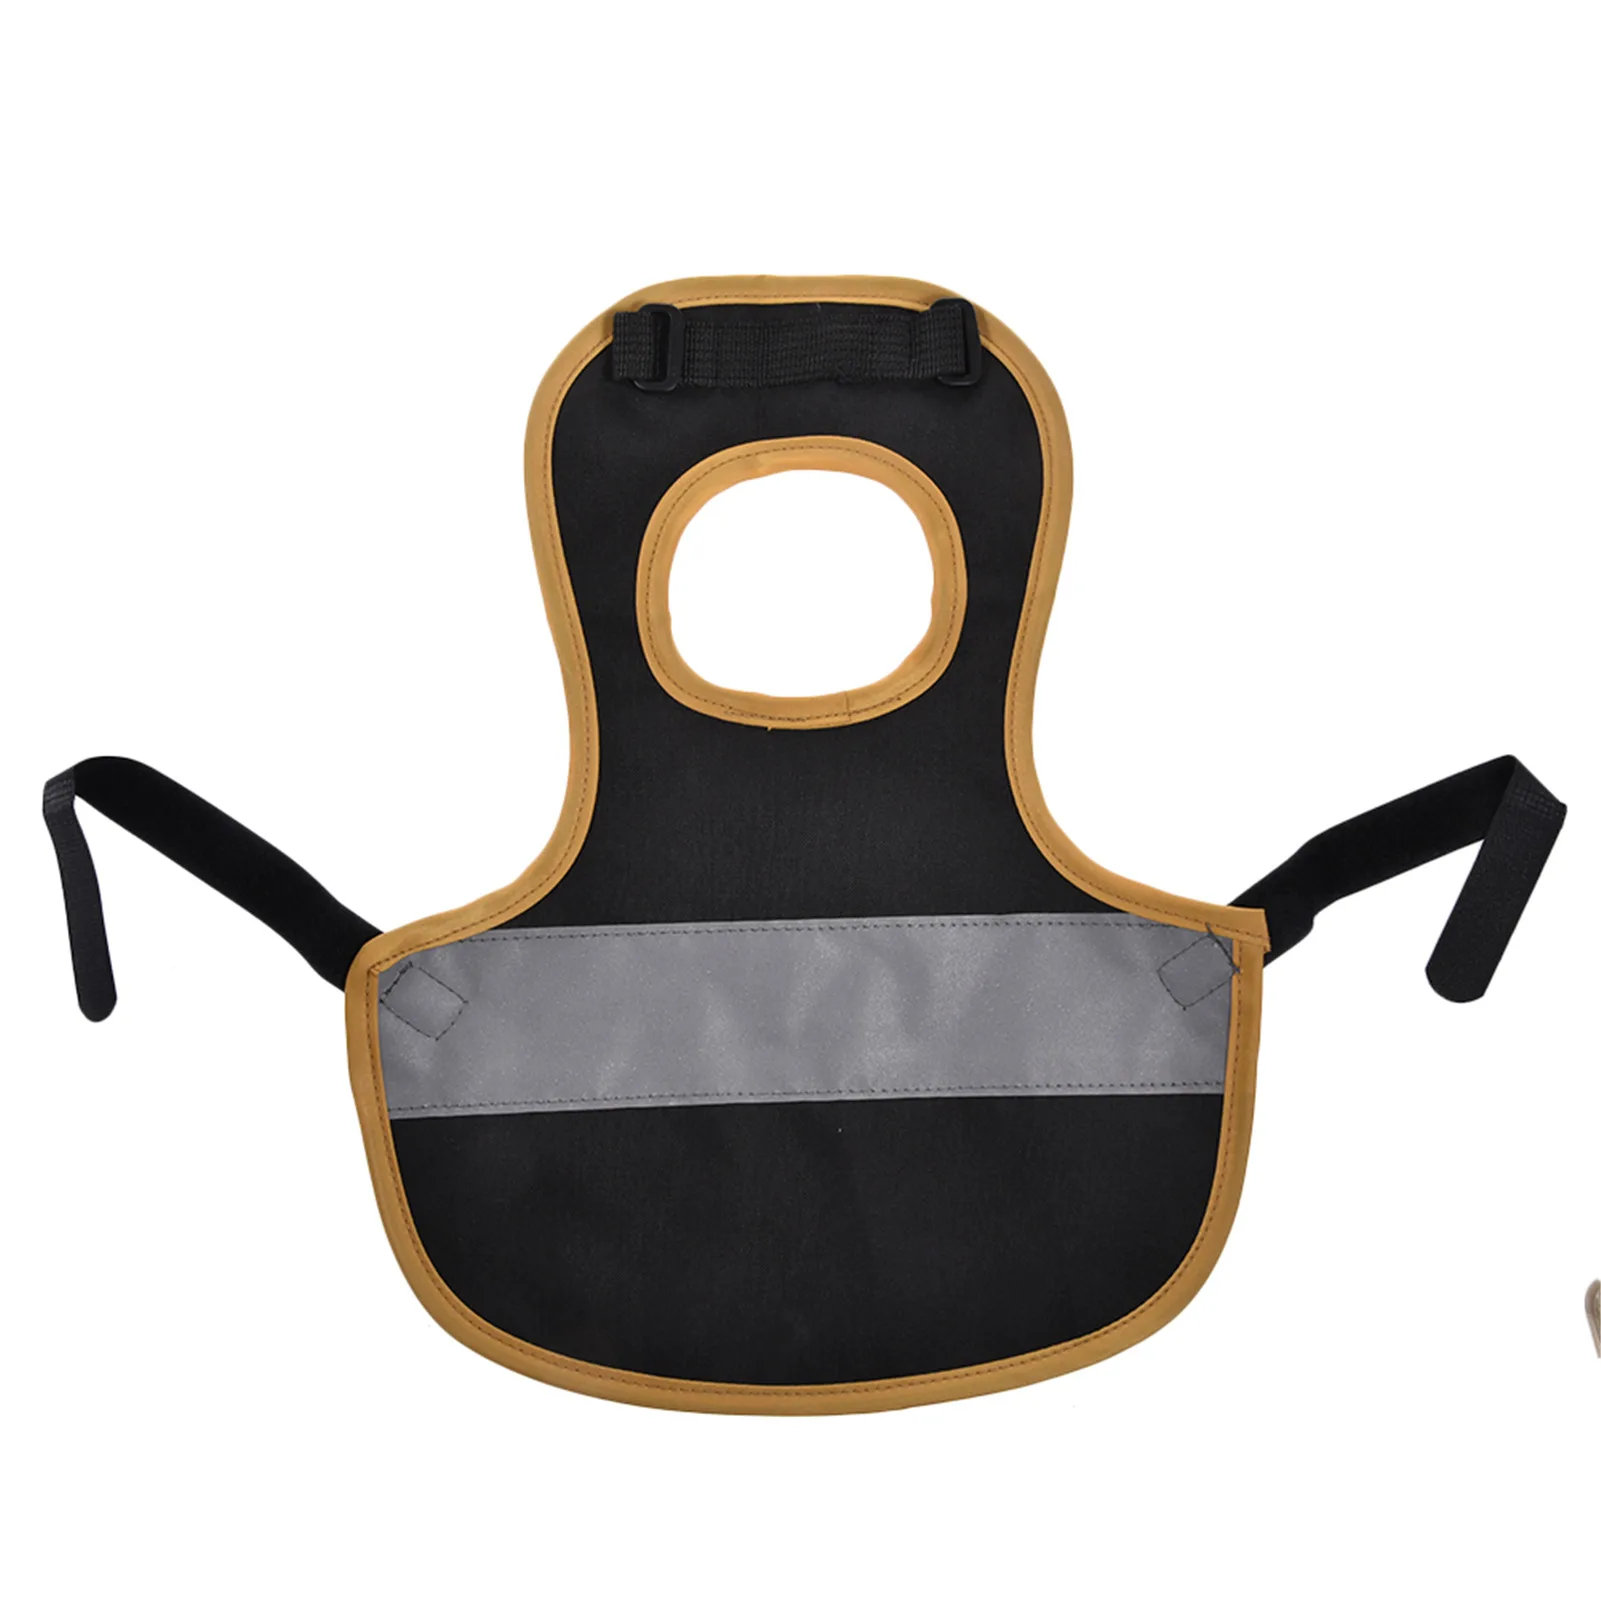 Hen Saddle For Chickens Chicken Saddle Apron Poultry Apron With Elastic Strap Chicken Protection Suit For Small Medium Large Hen